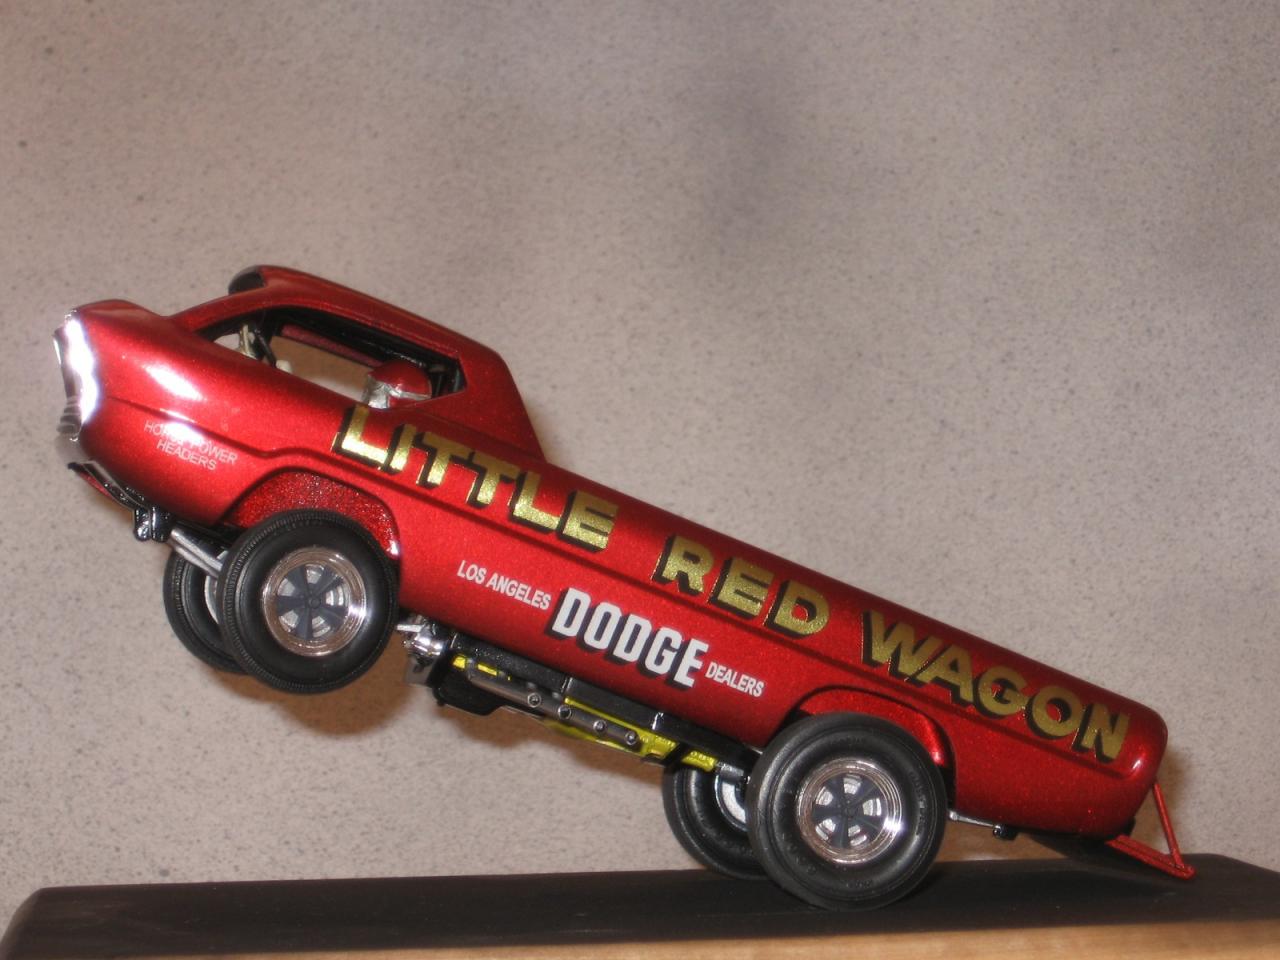 Little Red Wagon Deora Wip Drag Racing Models Model Cars Magazine